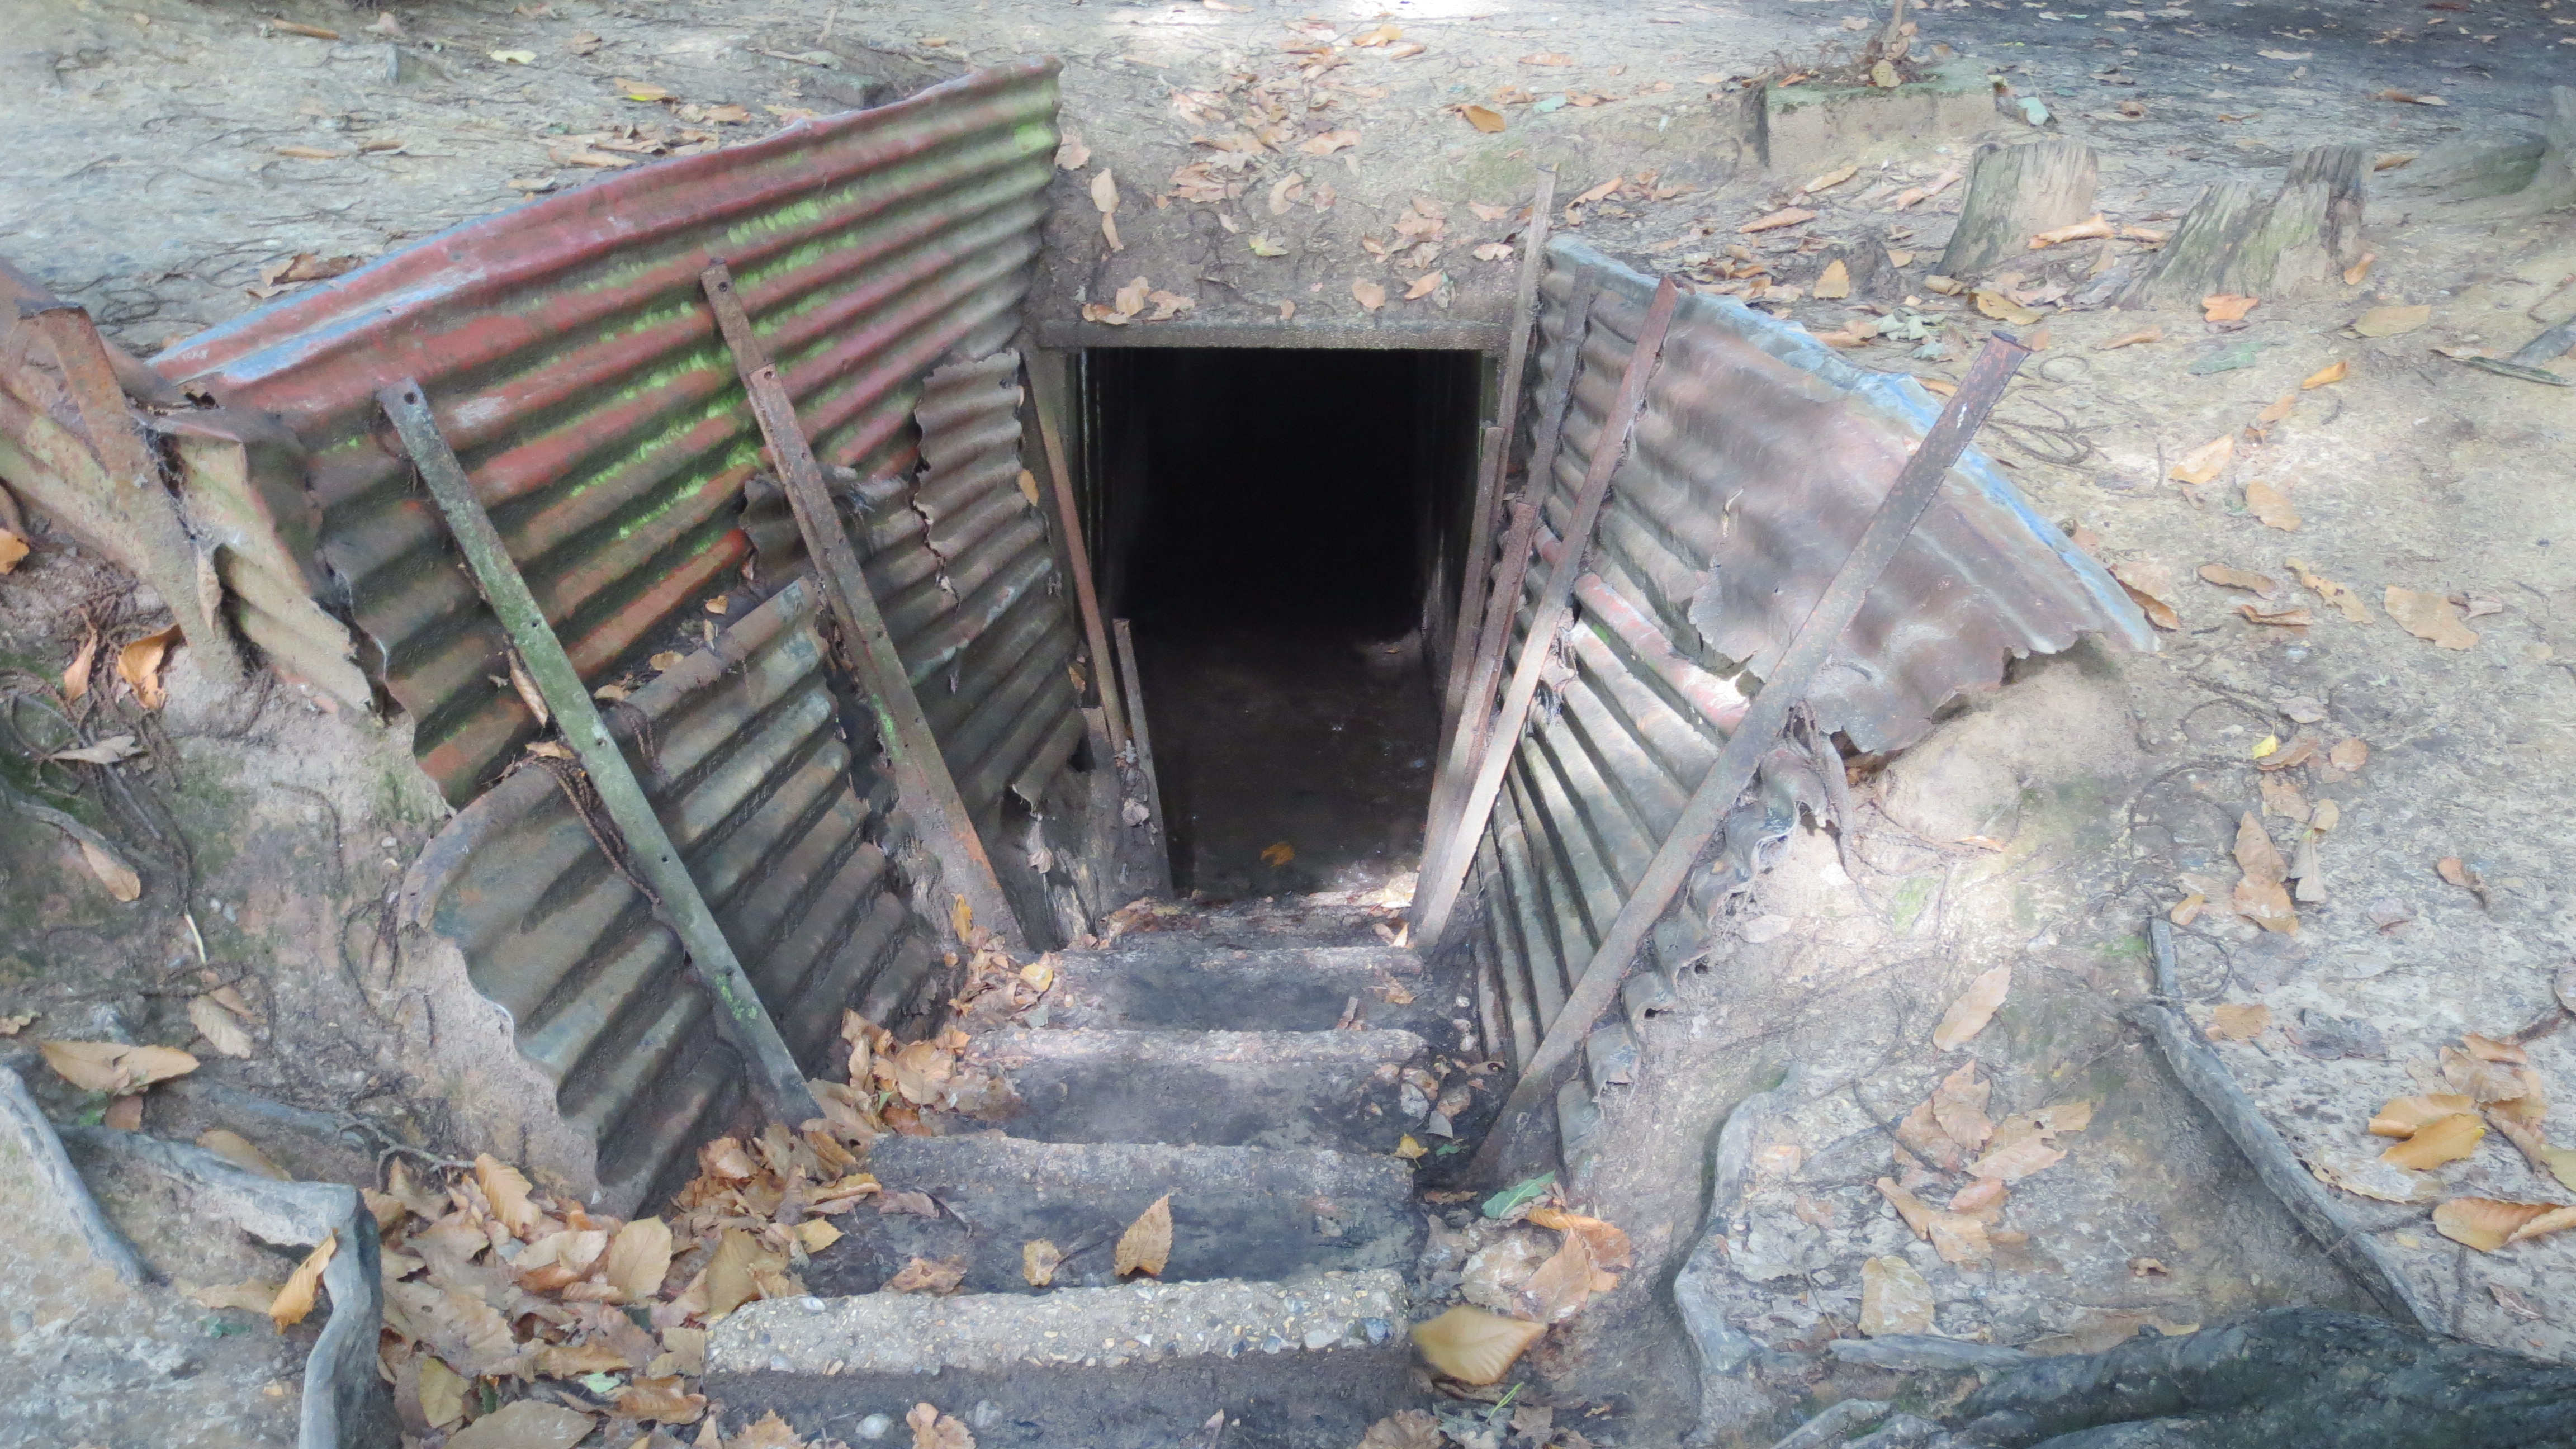 Entrance to a tunnel dug into "No Man's Lan" with the aim of capturing land forward of the current trench line.